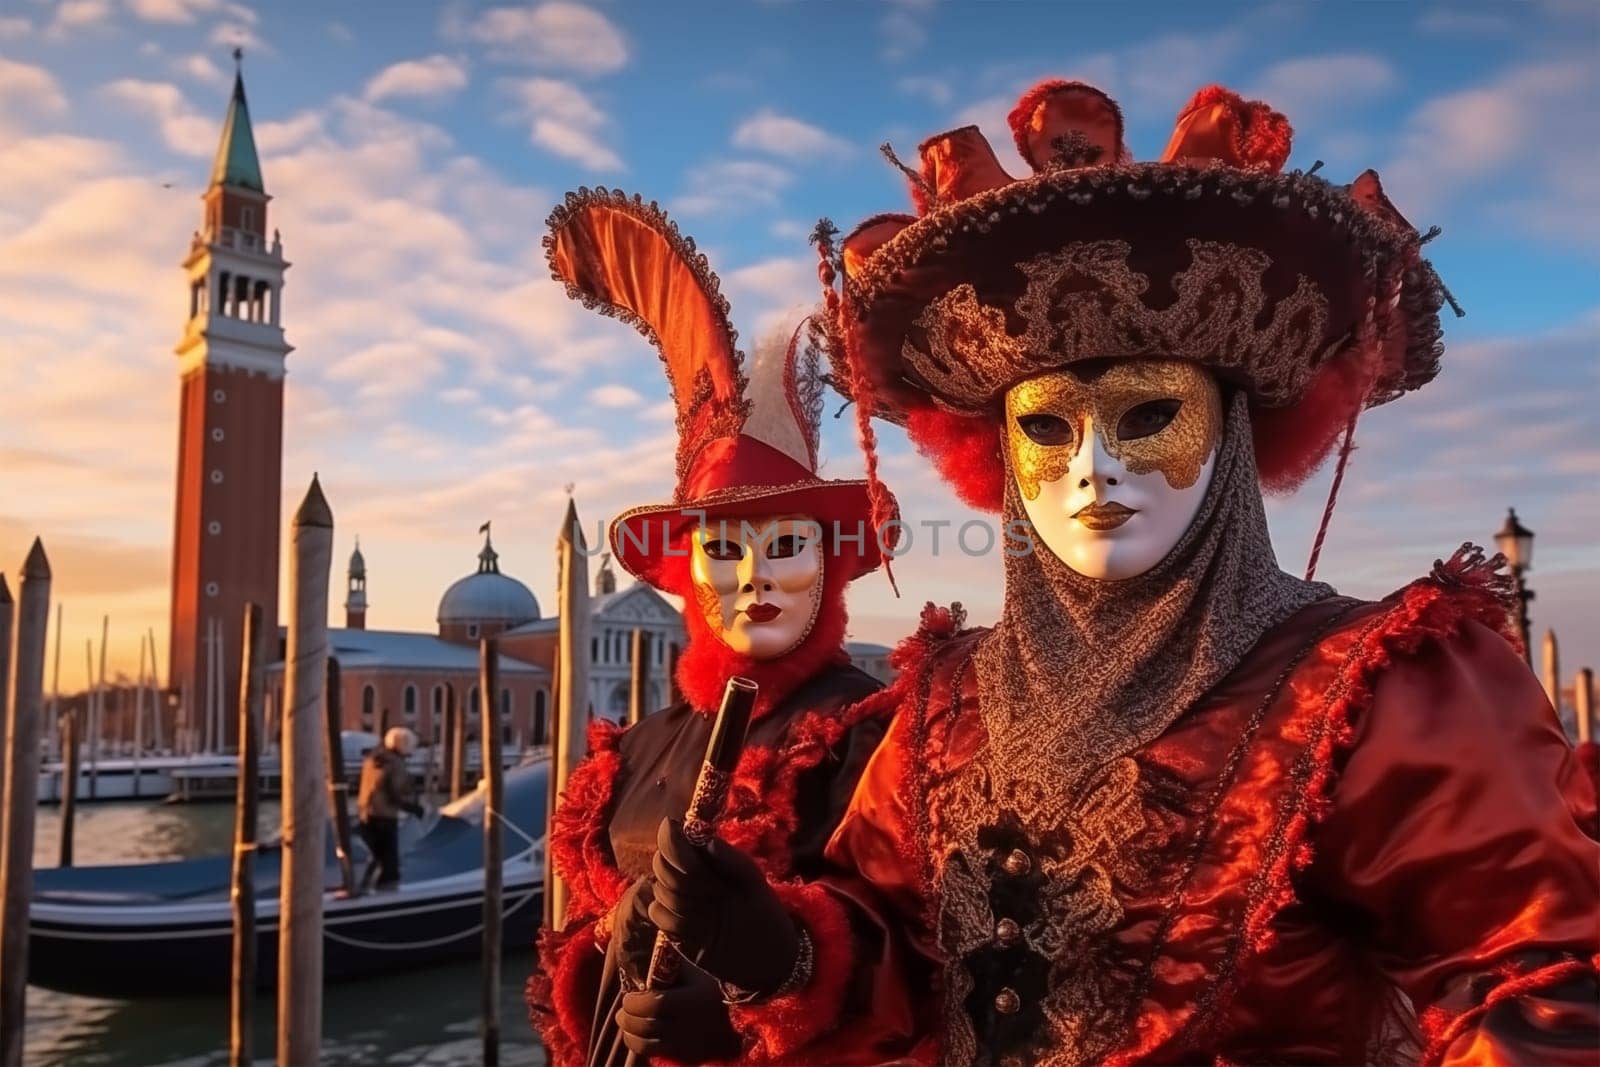 Elegant Persons in Vibrant Carnival Costume and Mask at Venice Festival by dimol